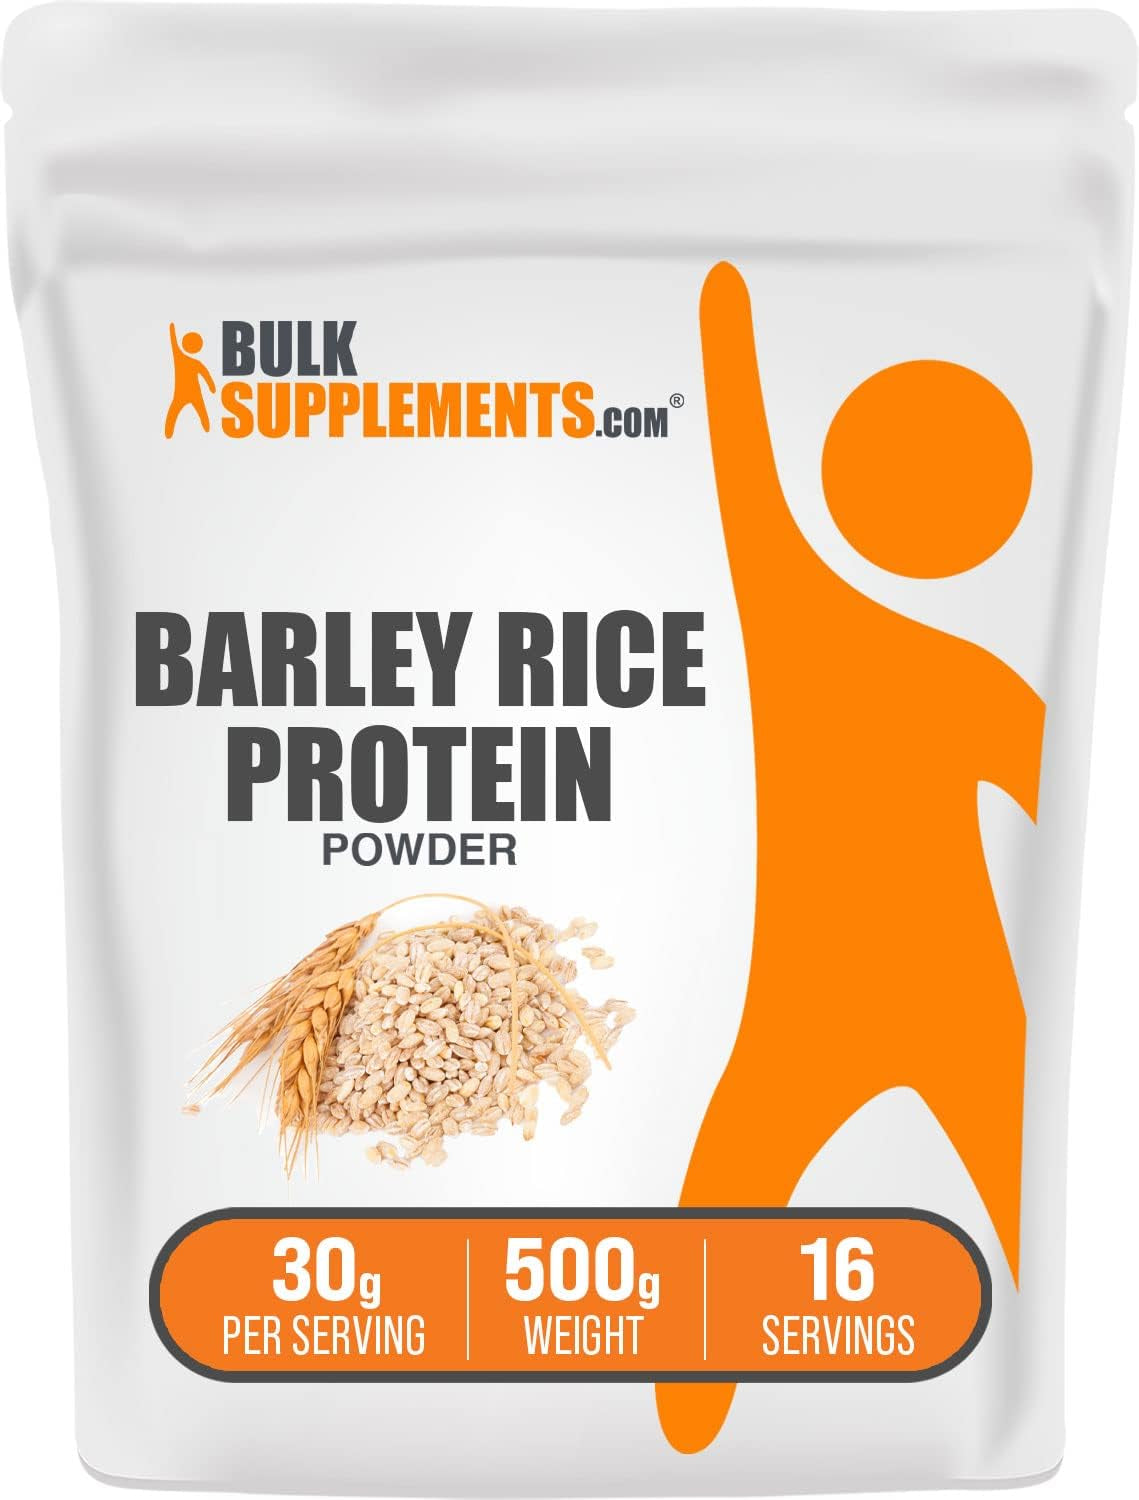 BULKSUPPLEMENTS.COM Barley Rice Protein Powder - Post-Workout Muscle Builder - Dairy Free, Soy Free - 30 Grams per Serving (500 Grams - 1.1 Lbs)